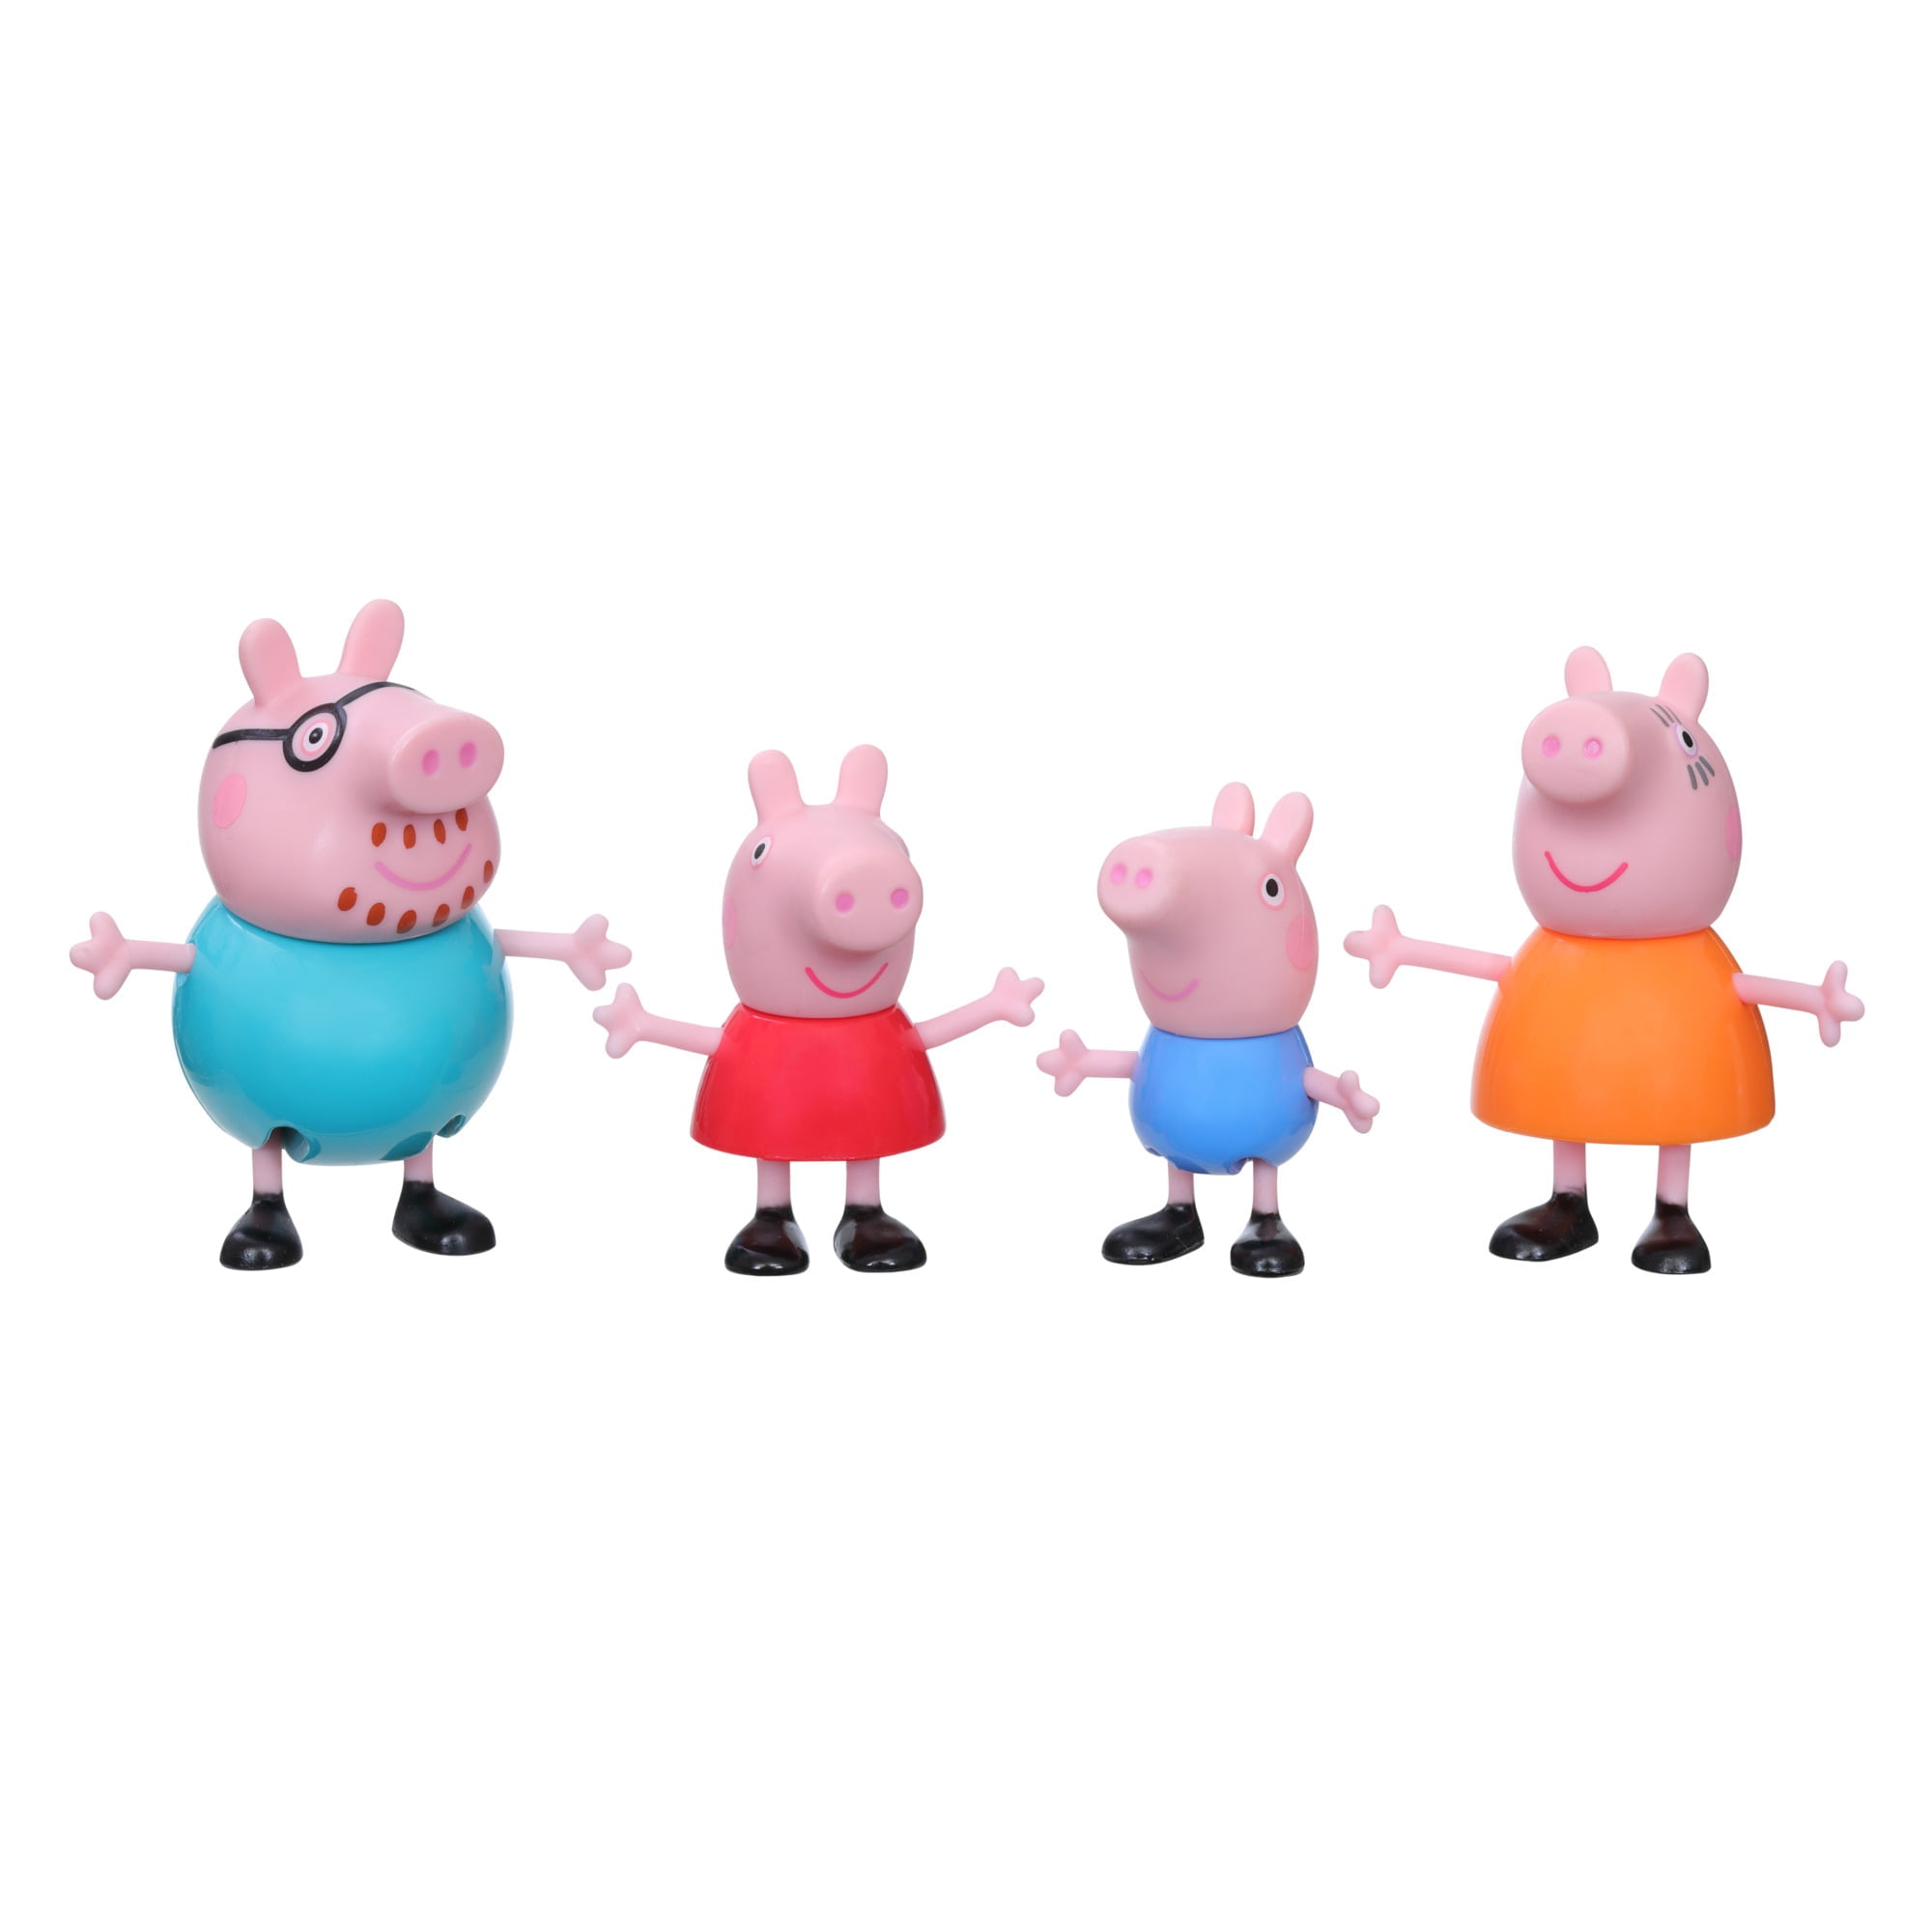 Peppa Pig Family Adventures, 3-Inch Action Figure Dolls in Pajamas